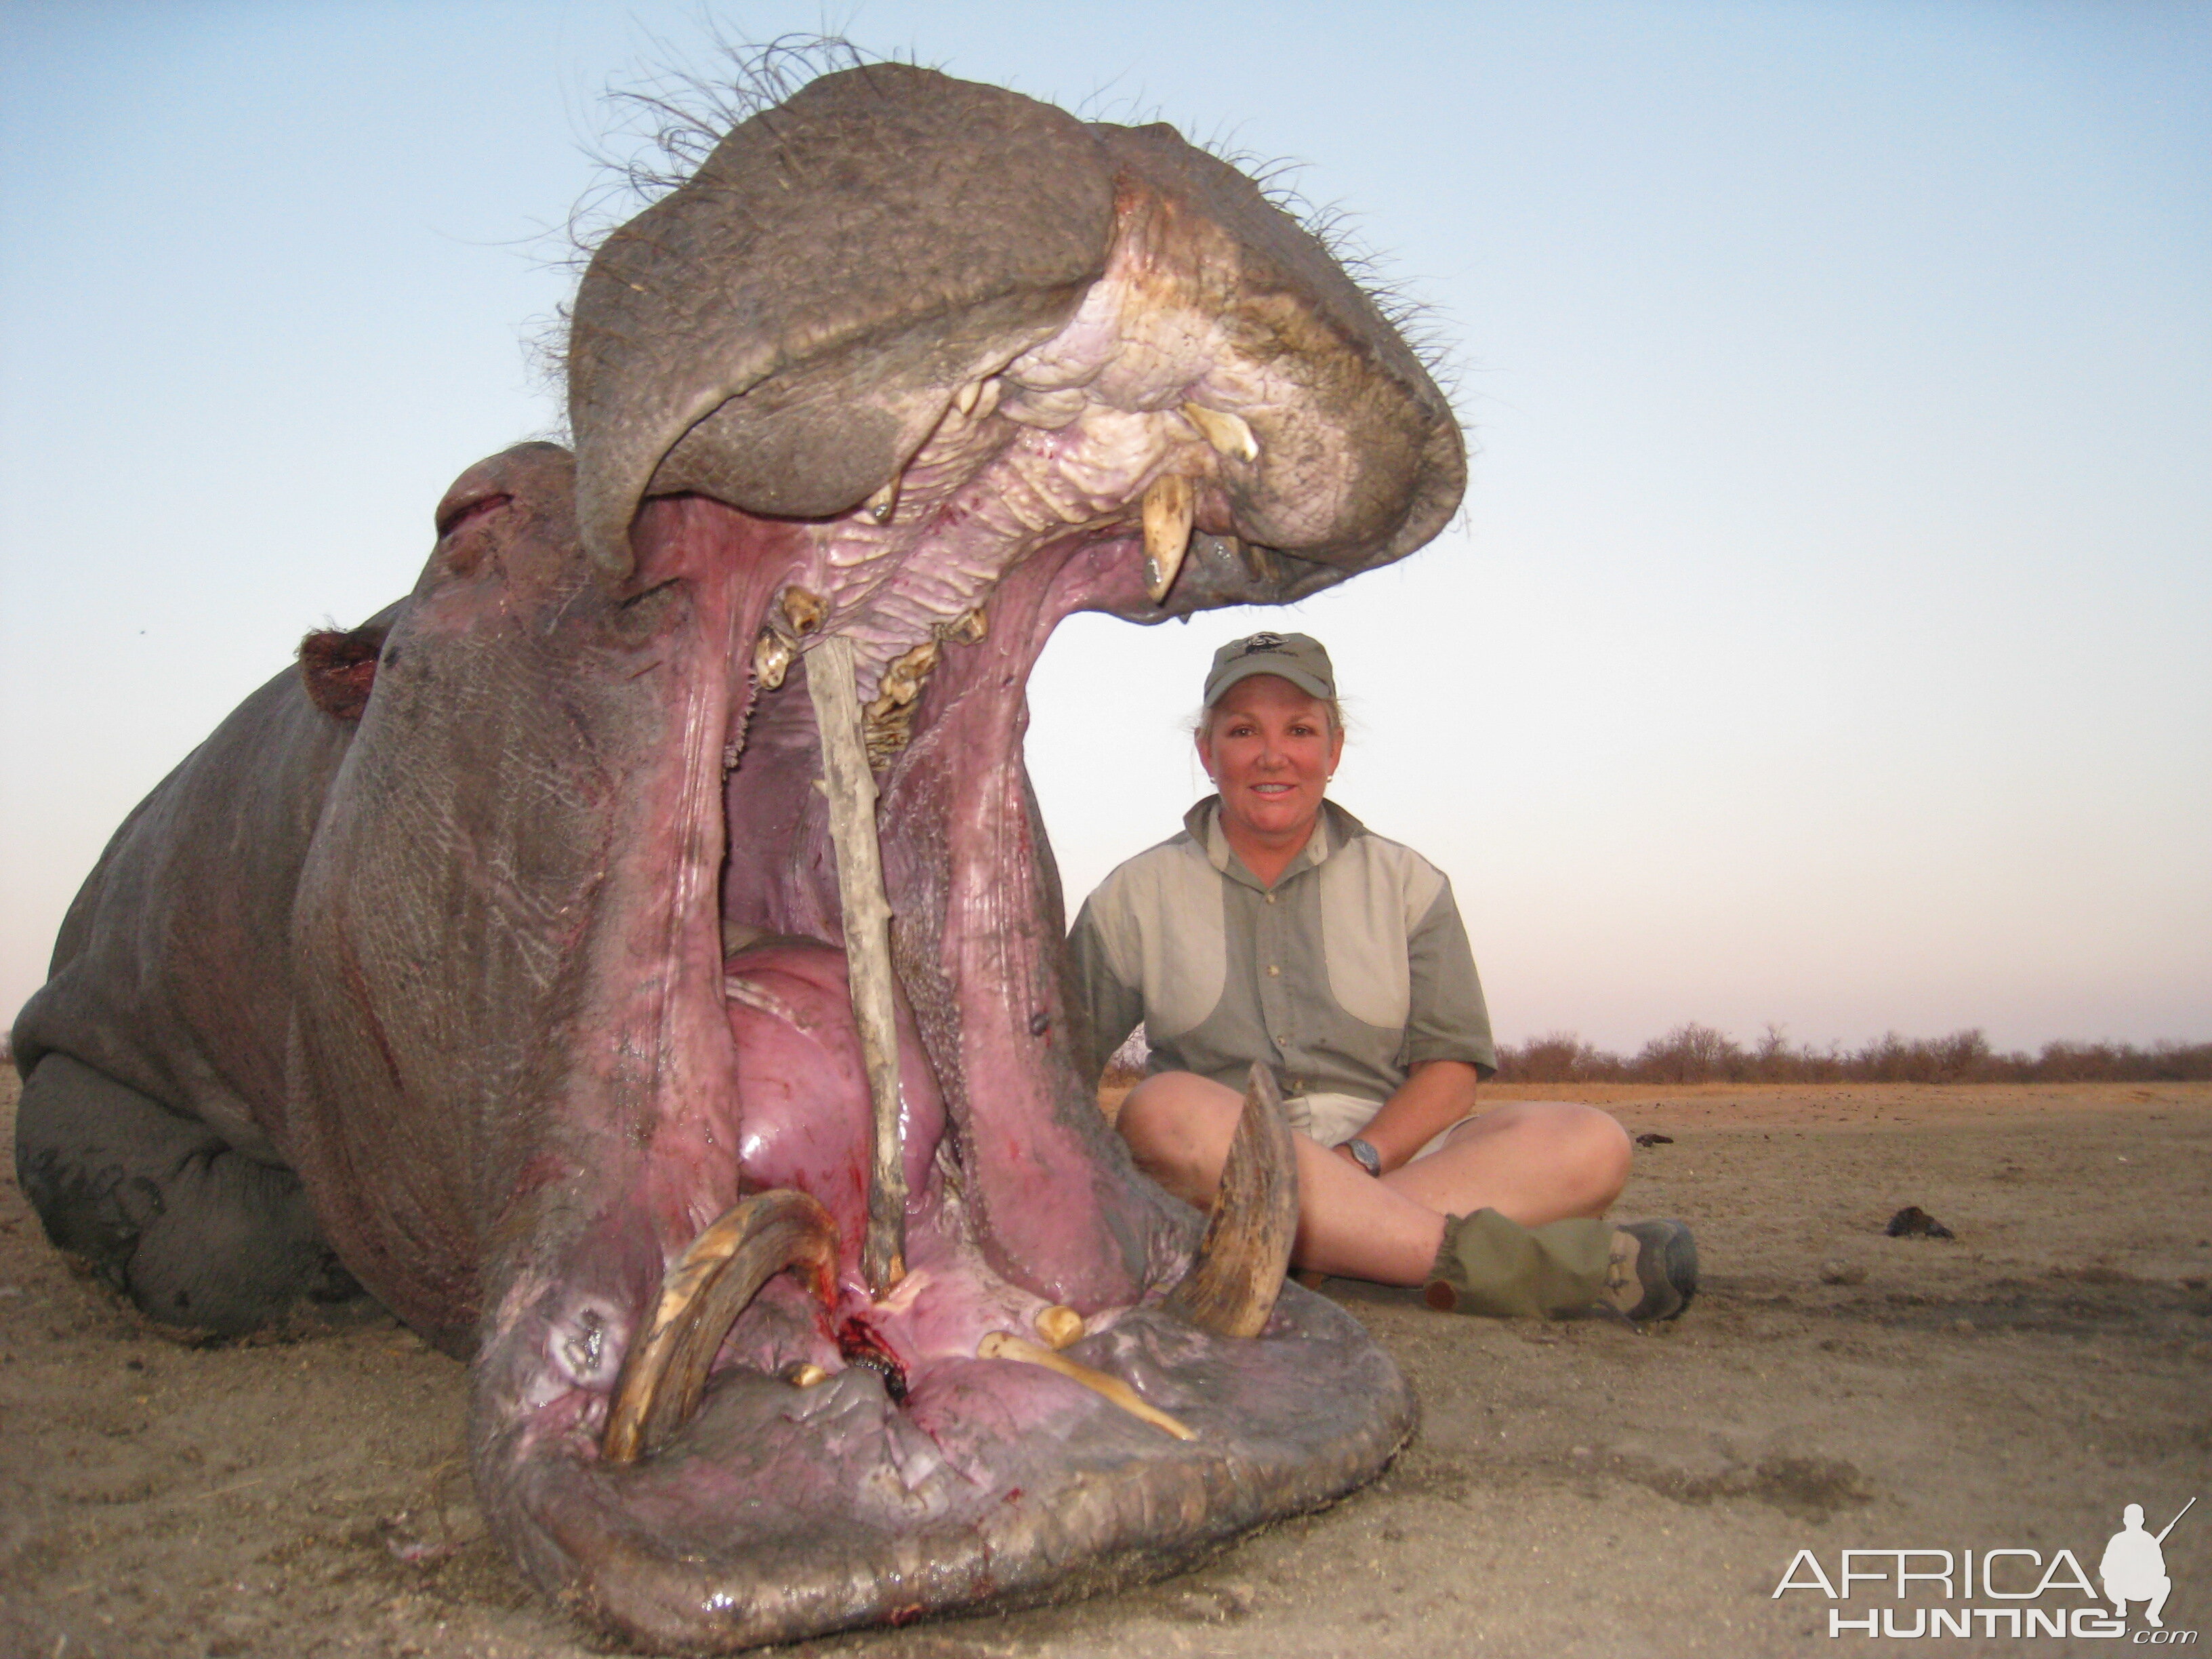 Huntress and a fine Hippo, the tusk on left curled all the way back into the jaw......